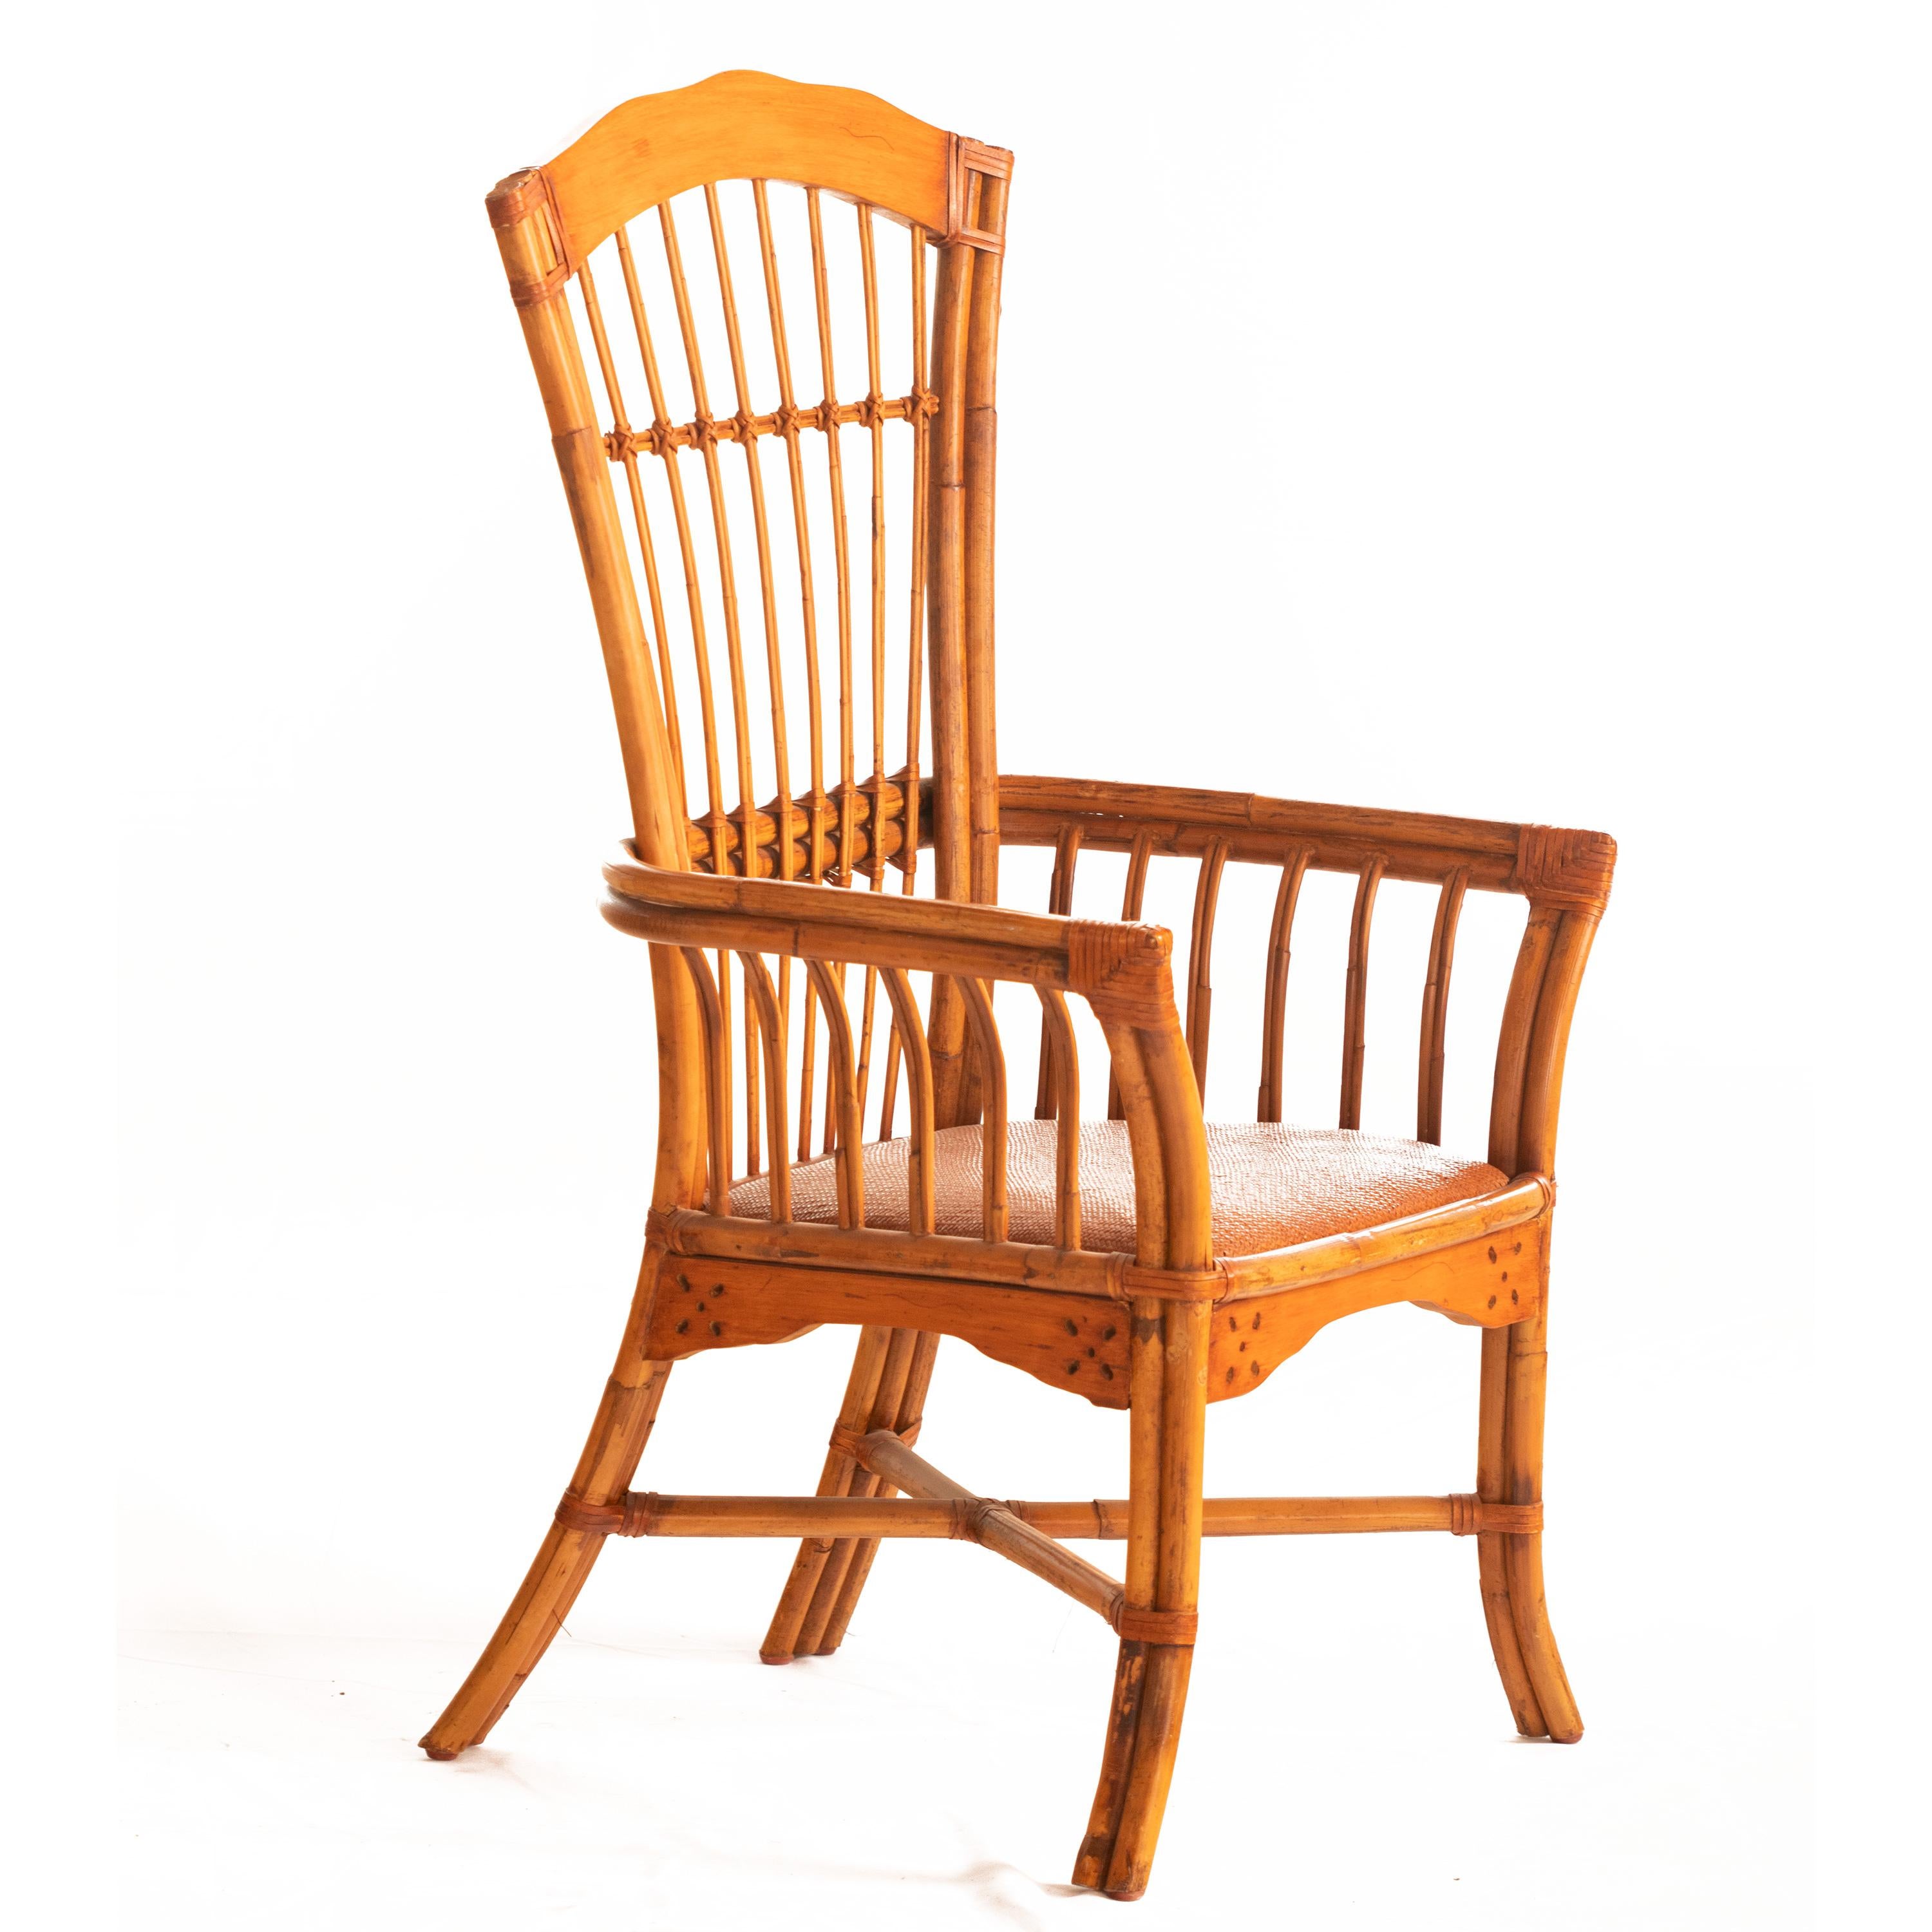 Rattan Woven Cane Handmade Seat Armchair Kalma Modern Confortable Furniture In Excellent Condition For Sale In Milano, IT